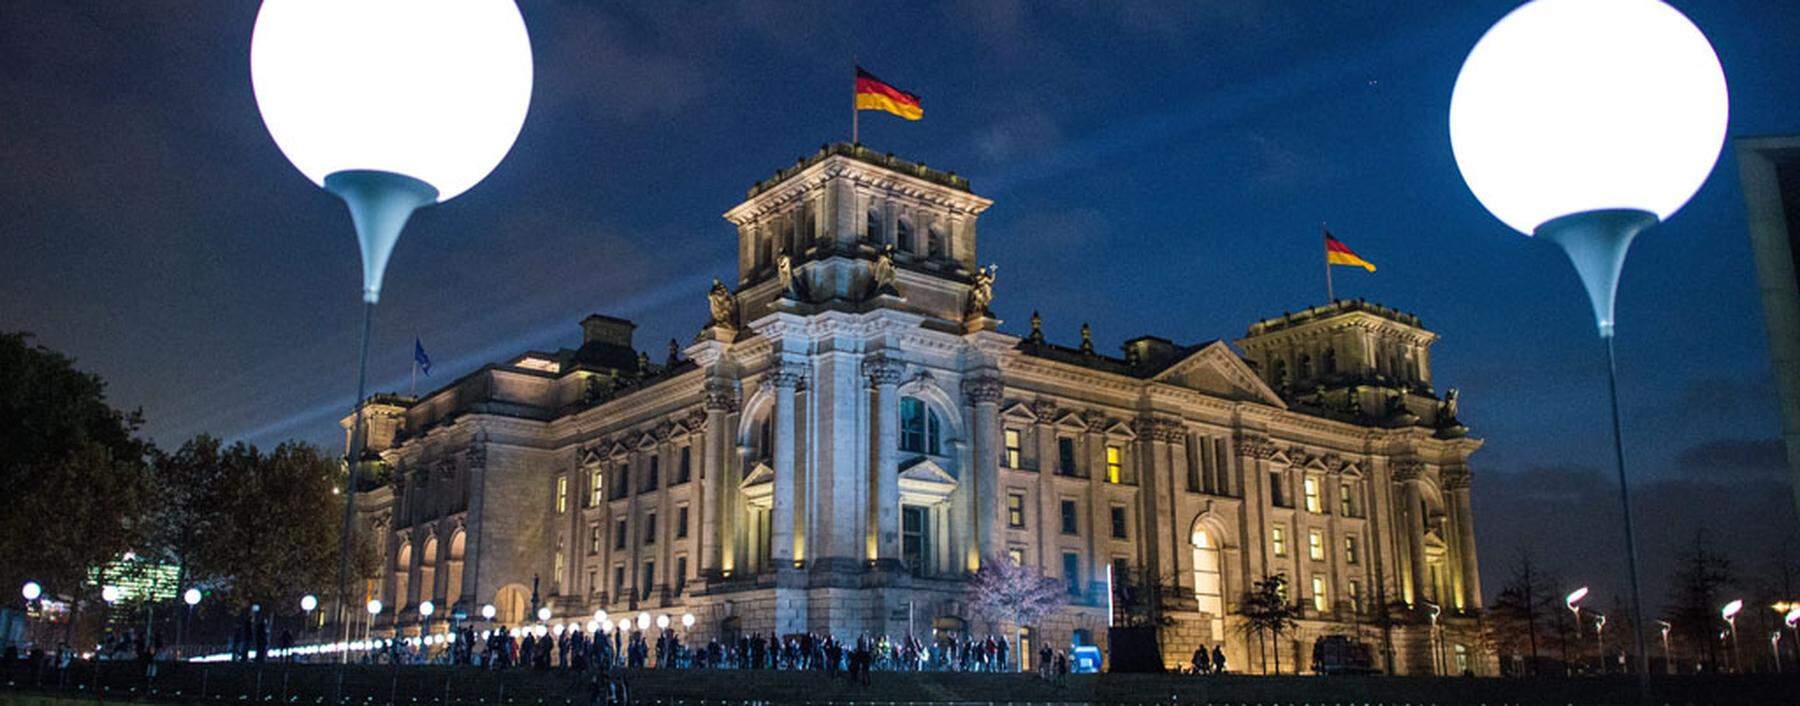 GERMANY ANNIVERSARY OF PEACEFUL REVOLUTION